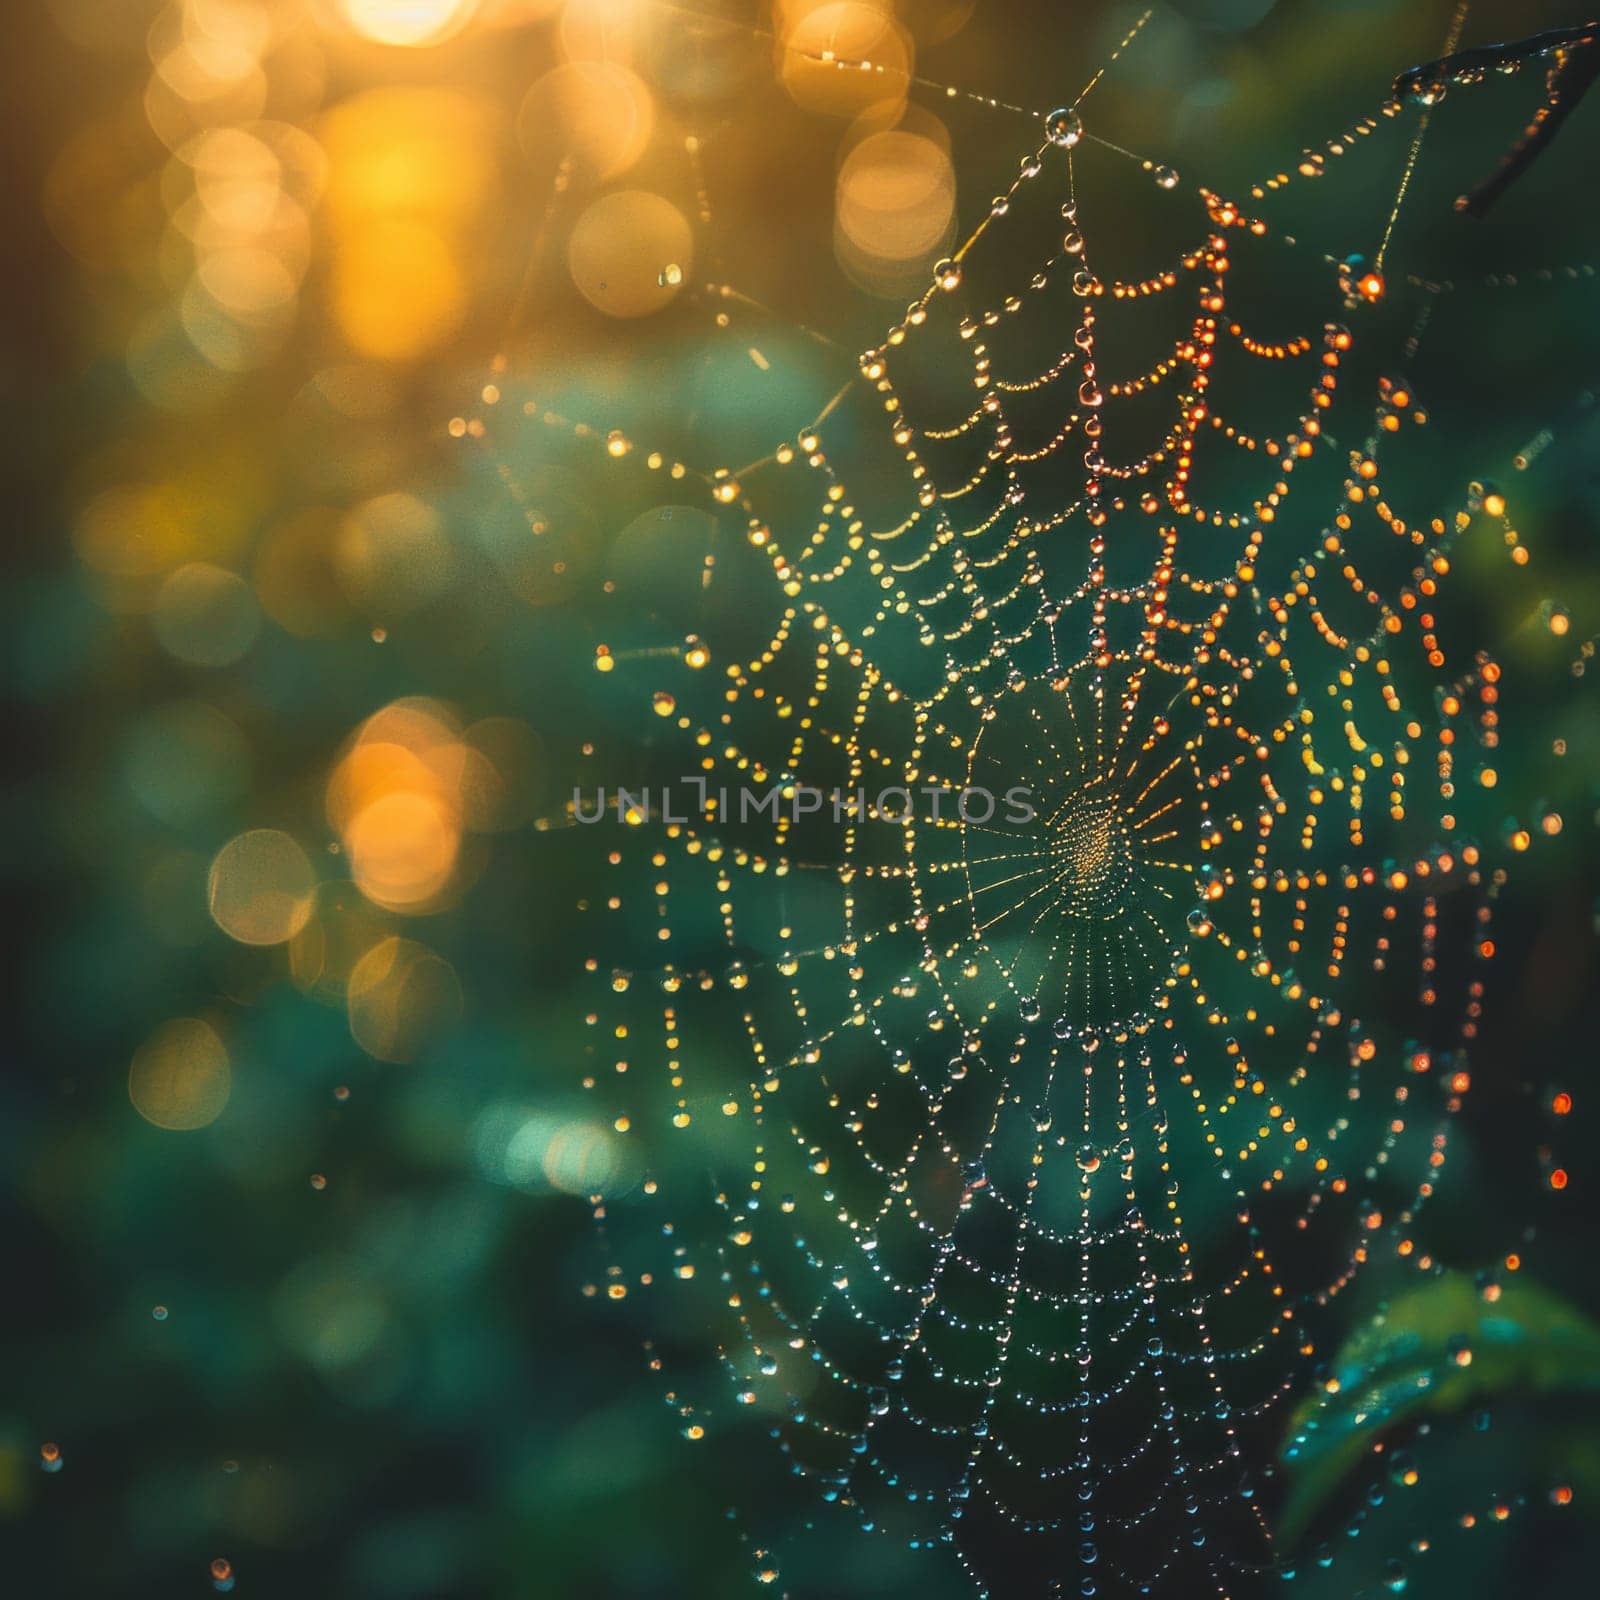 A delicate spider web glistens with dew drops, creating a mesmerizing scene in natures orchestra by but_photo